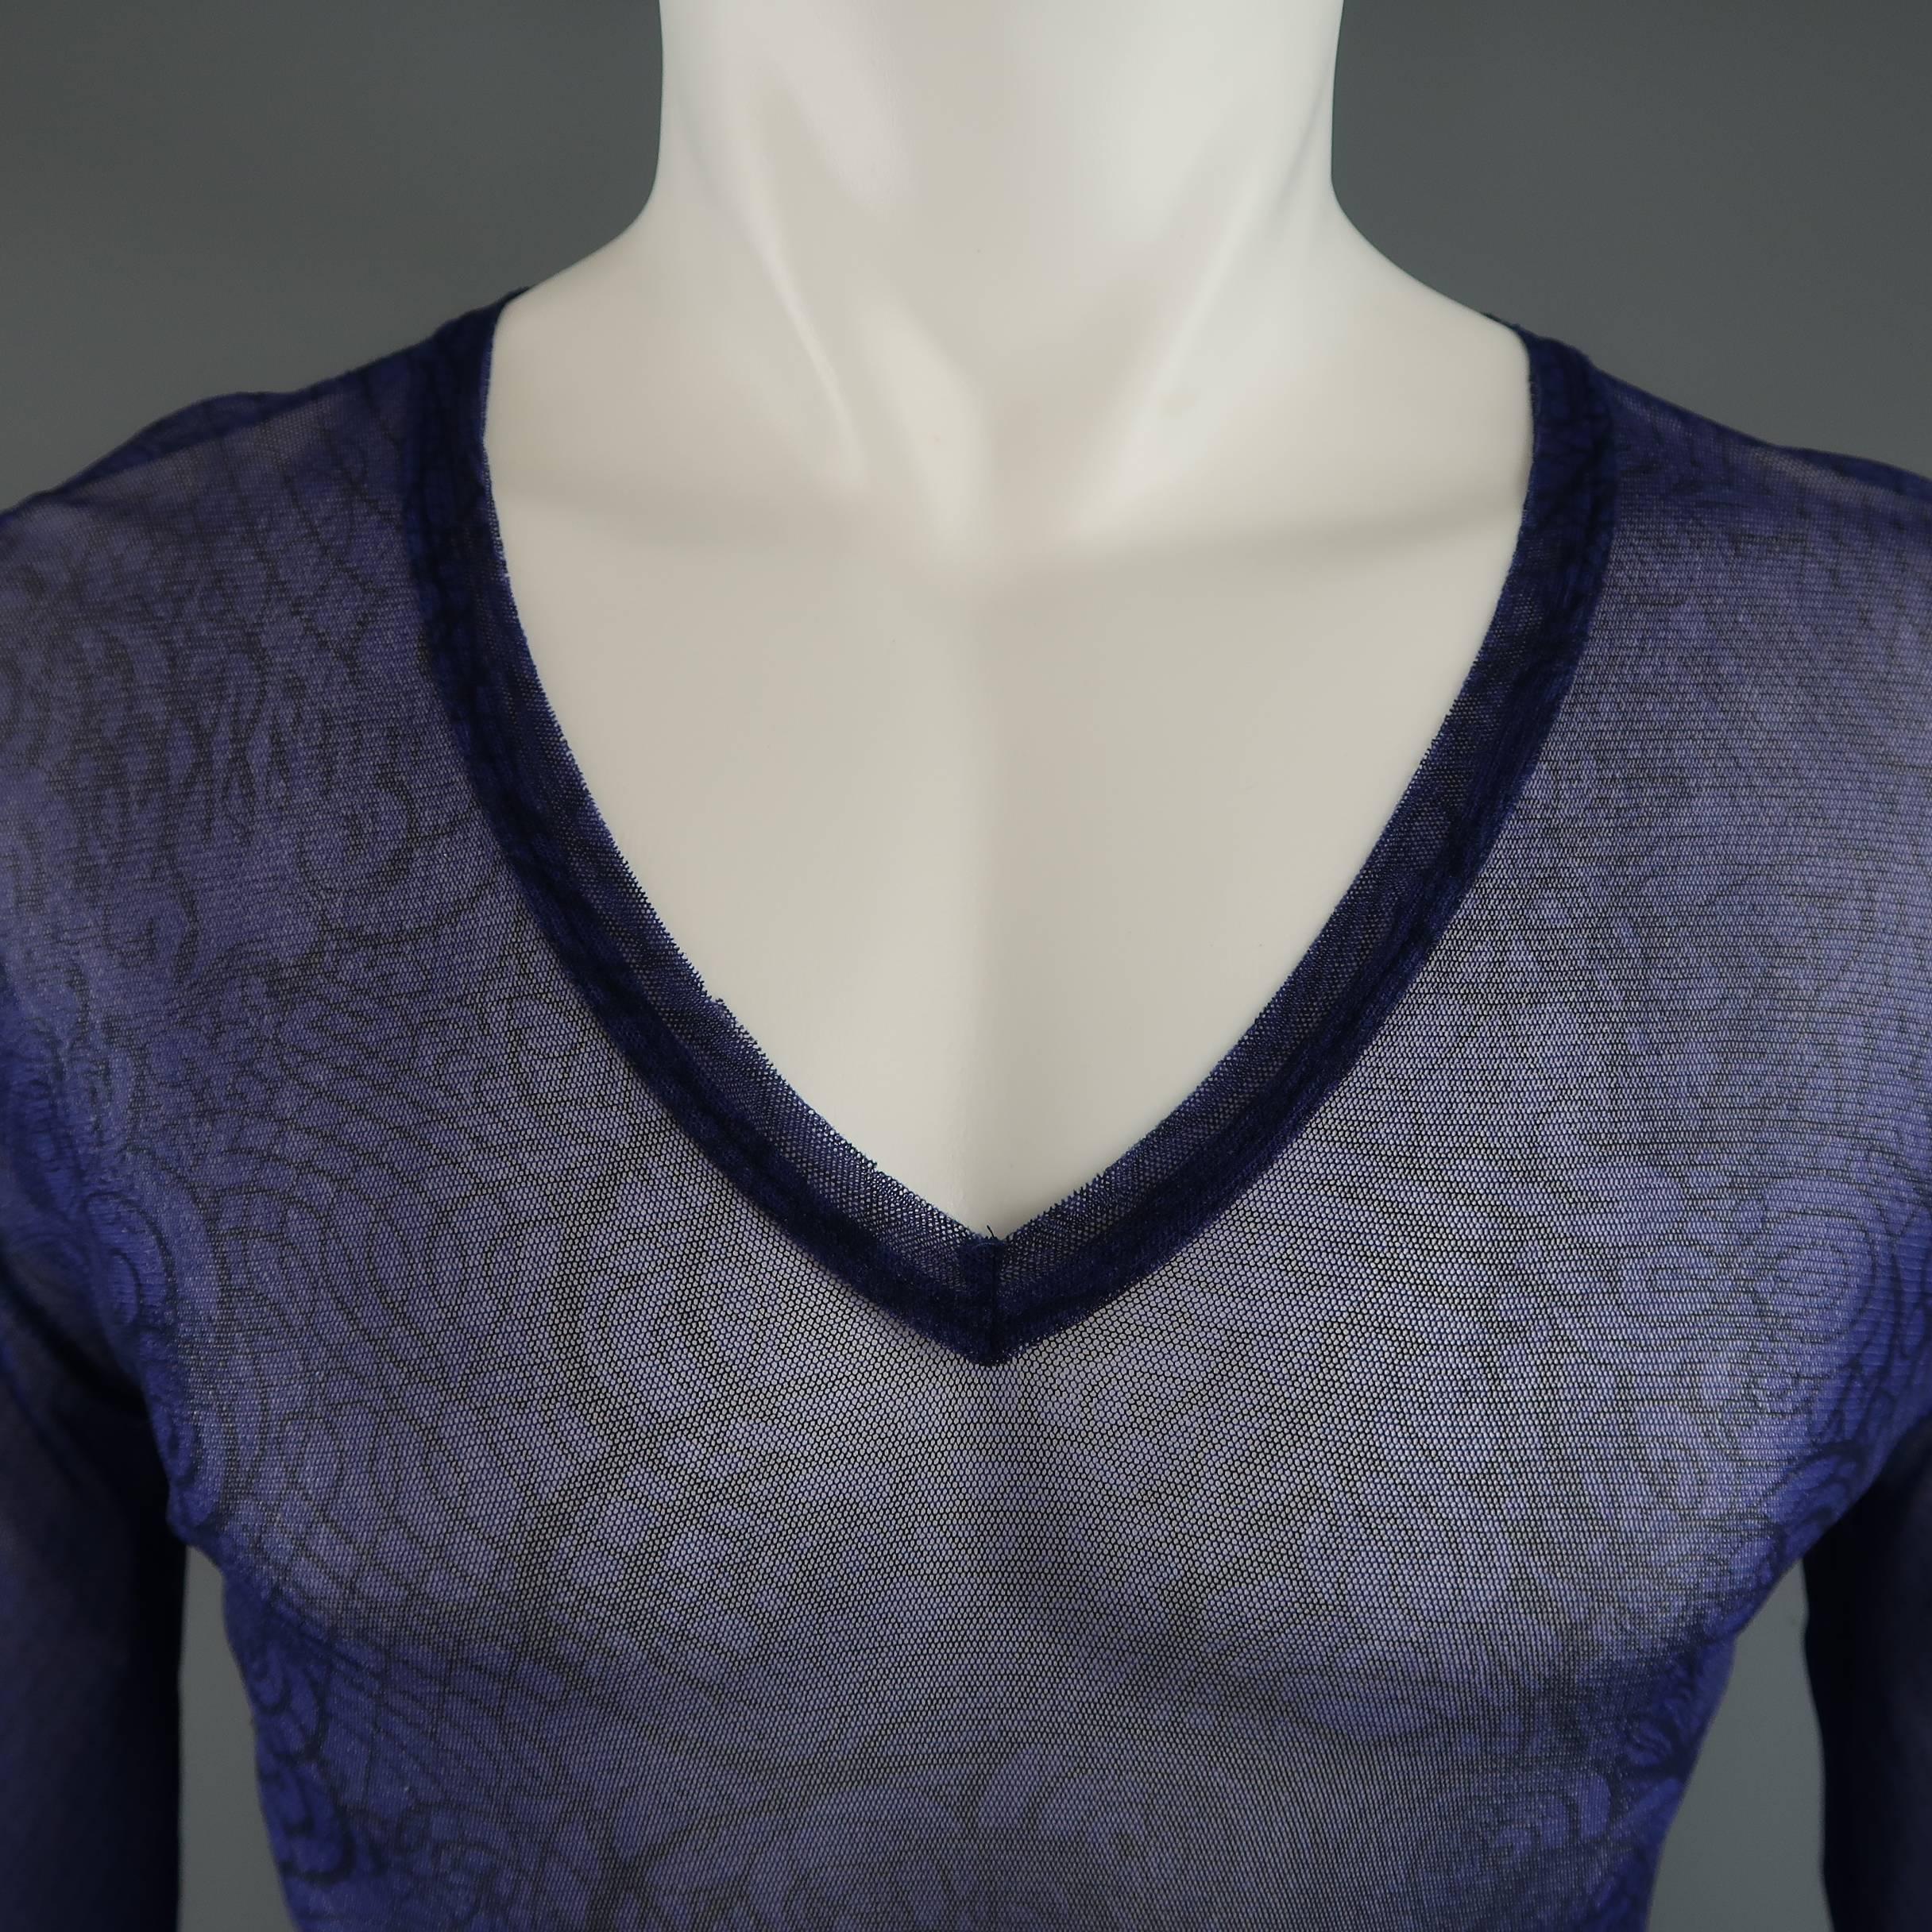 JEAN PAUL GAULTIER Soleil shirt comes in blue and navy abstract print micro mesh with a V neck and fishnet print sleeves. Made in Italy.
 
Excellent Pre-Owned Condition.
Marked: L
 
Measurements:
 
Shoulder: 19 in.
Chest: 38 in.
Sleeve: 27